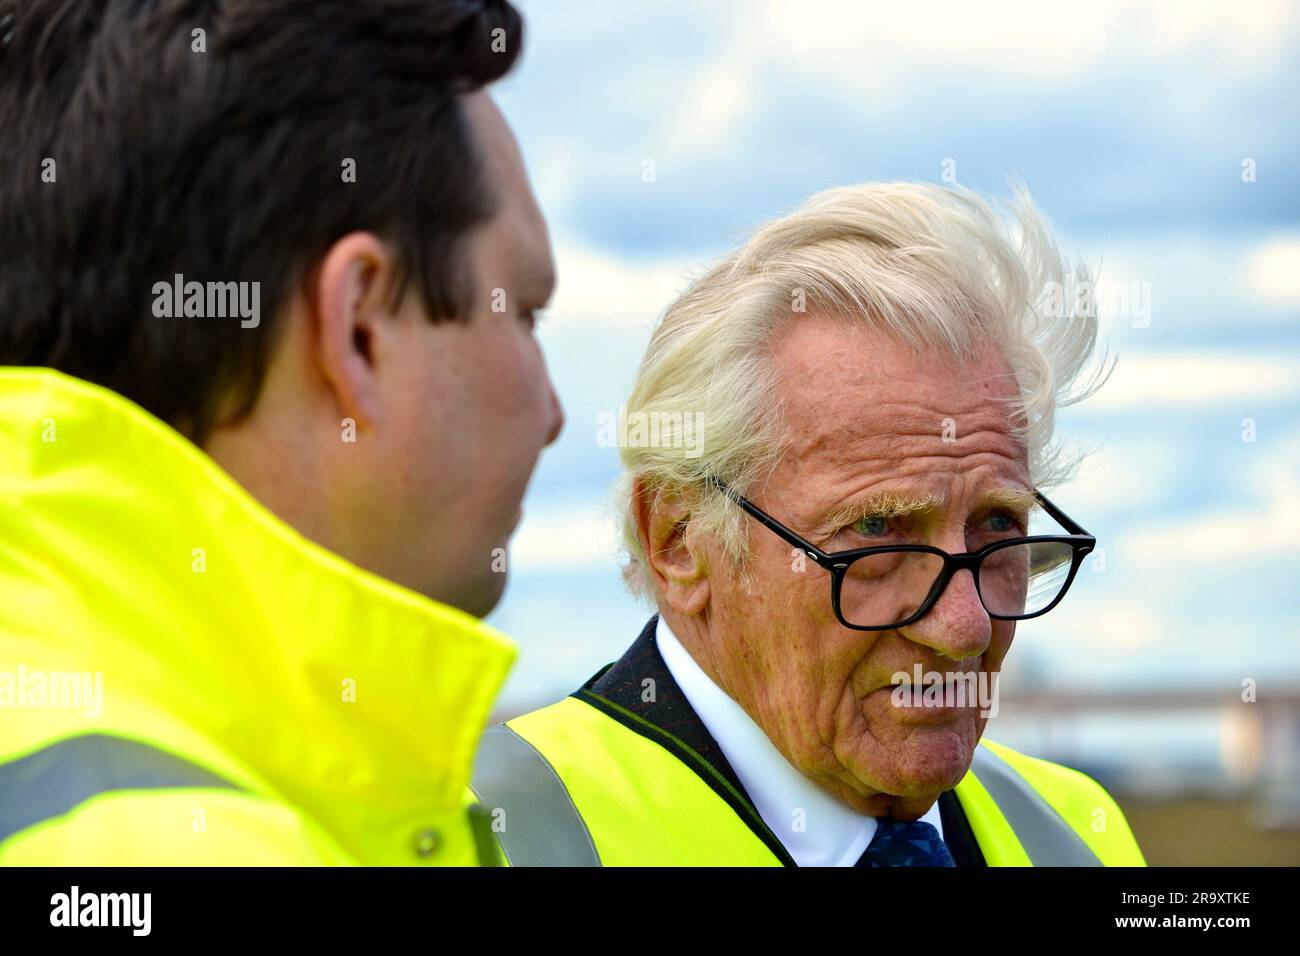 Redcar, UK. 29 Jun 2023. Lord Michael Heseltine pictured after detonating the final scheduled explosive blowdown on the Teesworks site today. This saw the former Redcar Steelworks Power Station and associated structures demolished - including a triple flare stack, the power station building, chimney, and gas holder, making way for redevelopment. Lord Michael Heseltine pressed the button to trigger the explosive demolition. Tees Valley Mayor Ben Houchen and Redcar MP Jacob Young were also present. The site is part of the Teesside Freeport and is currently being redeveloped, making way for new i Stock Photo